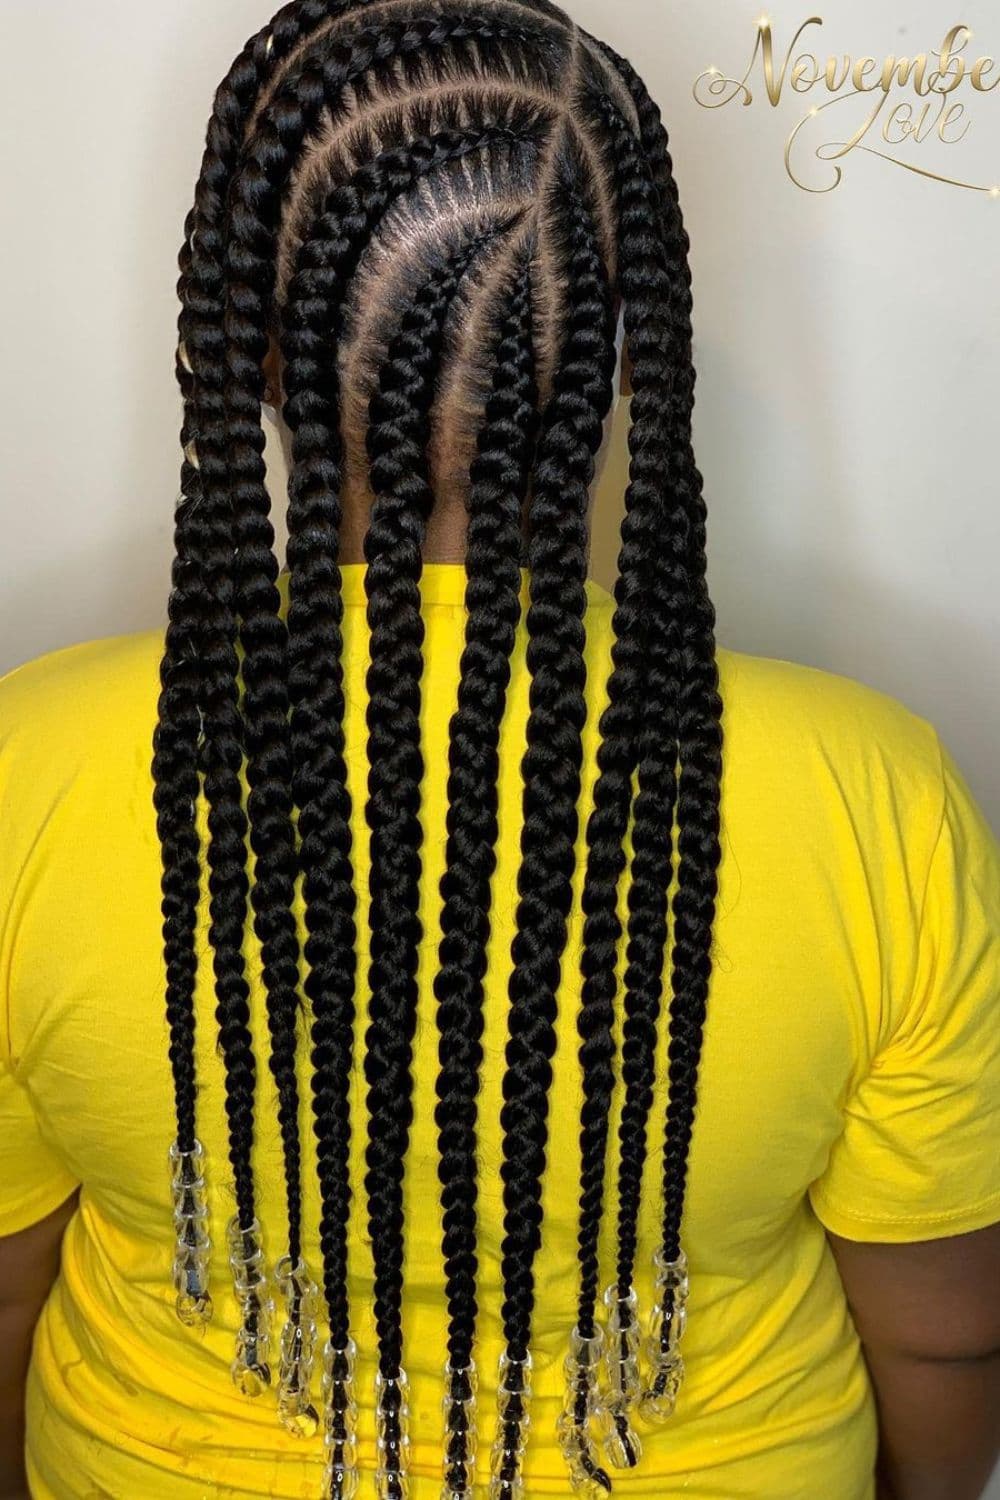 A woman wearing a yellow t-shirt with jumbo cornrows with beads.